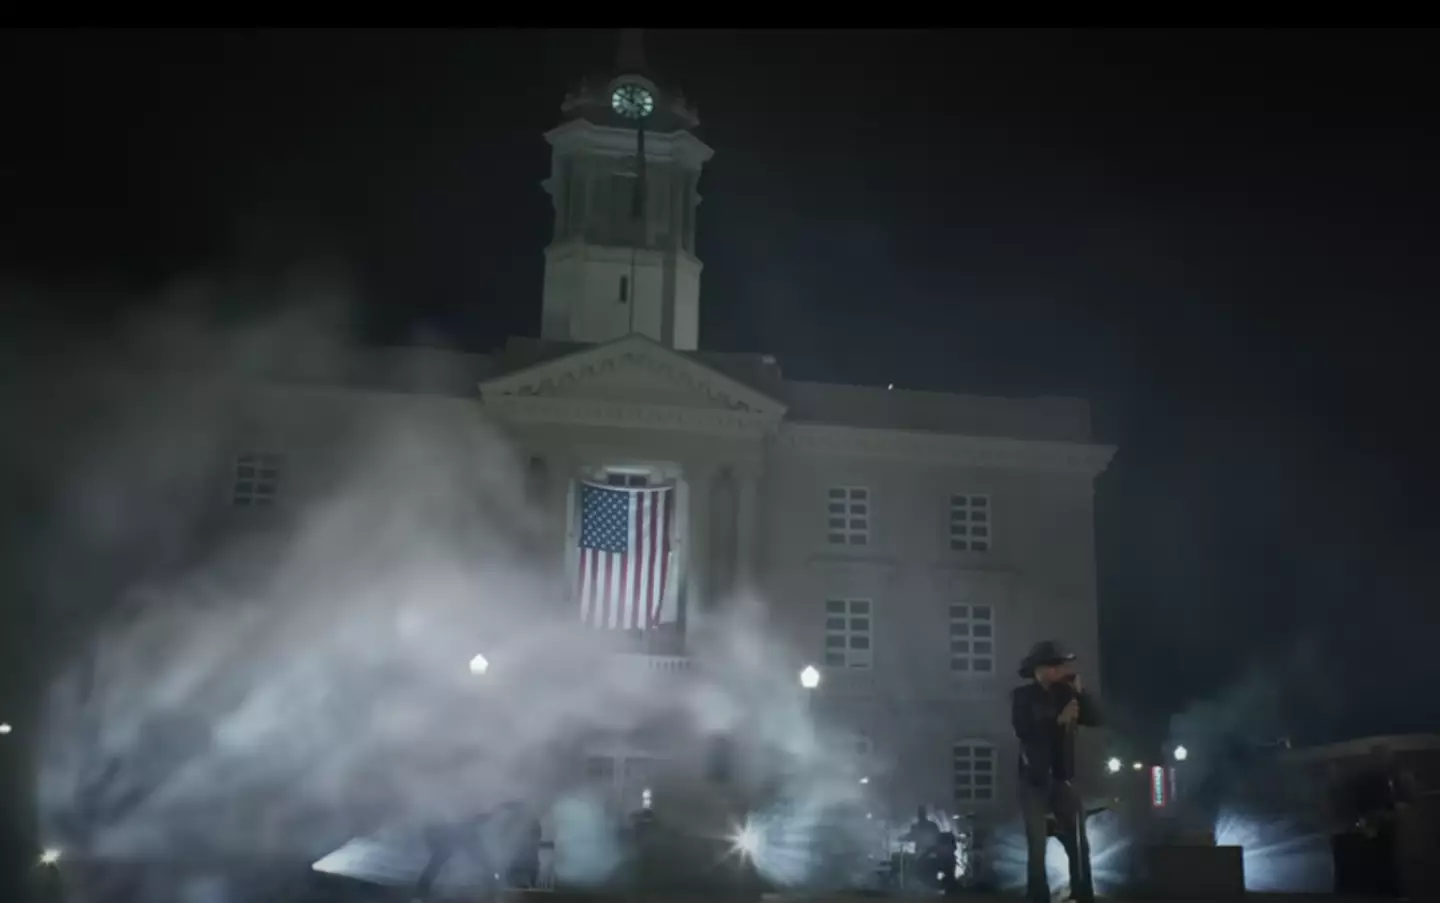 The music video was filmed outside the Maury County Courthouse.